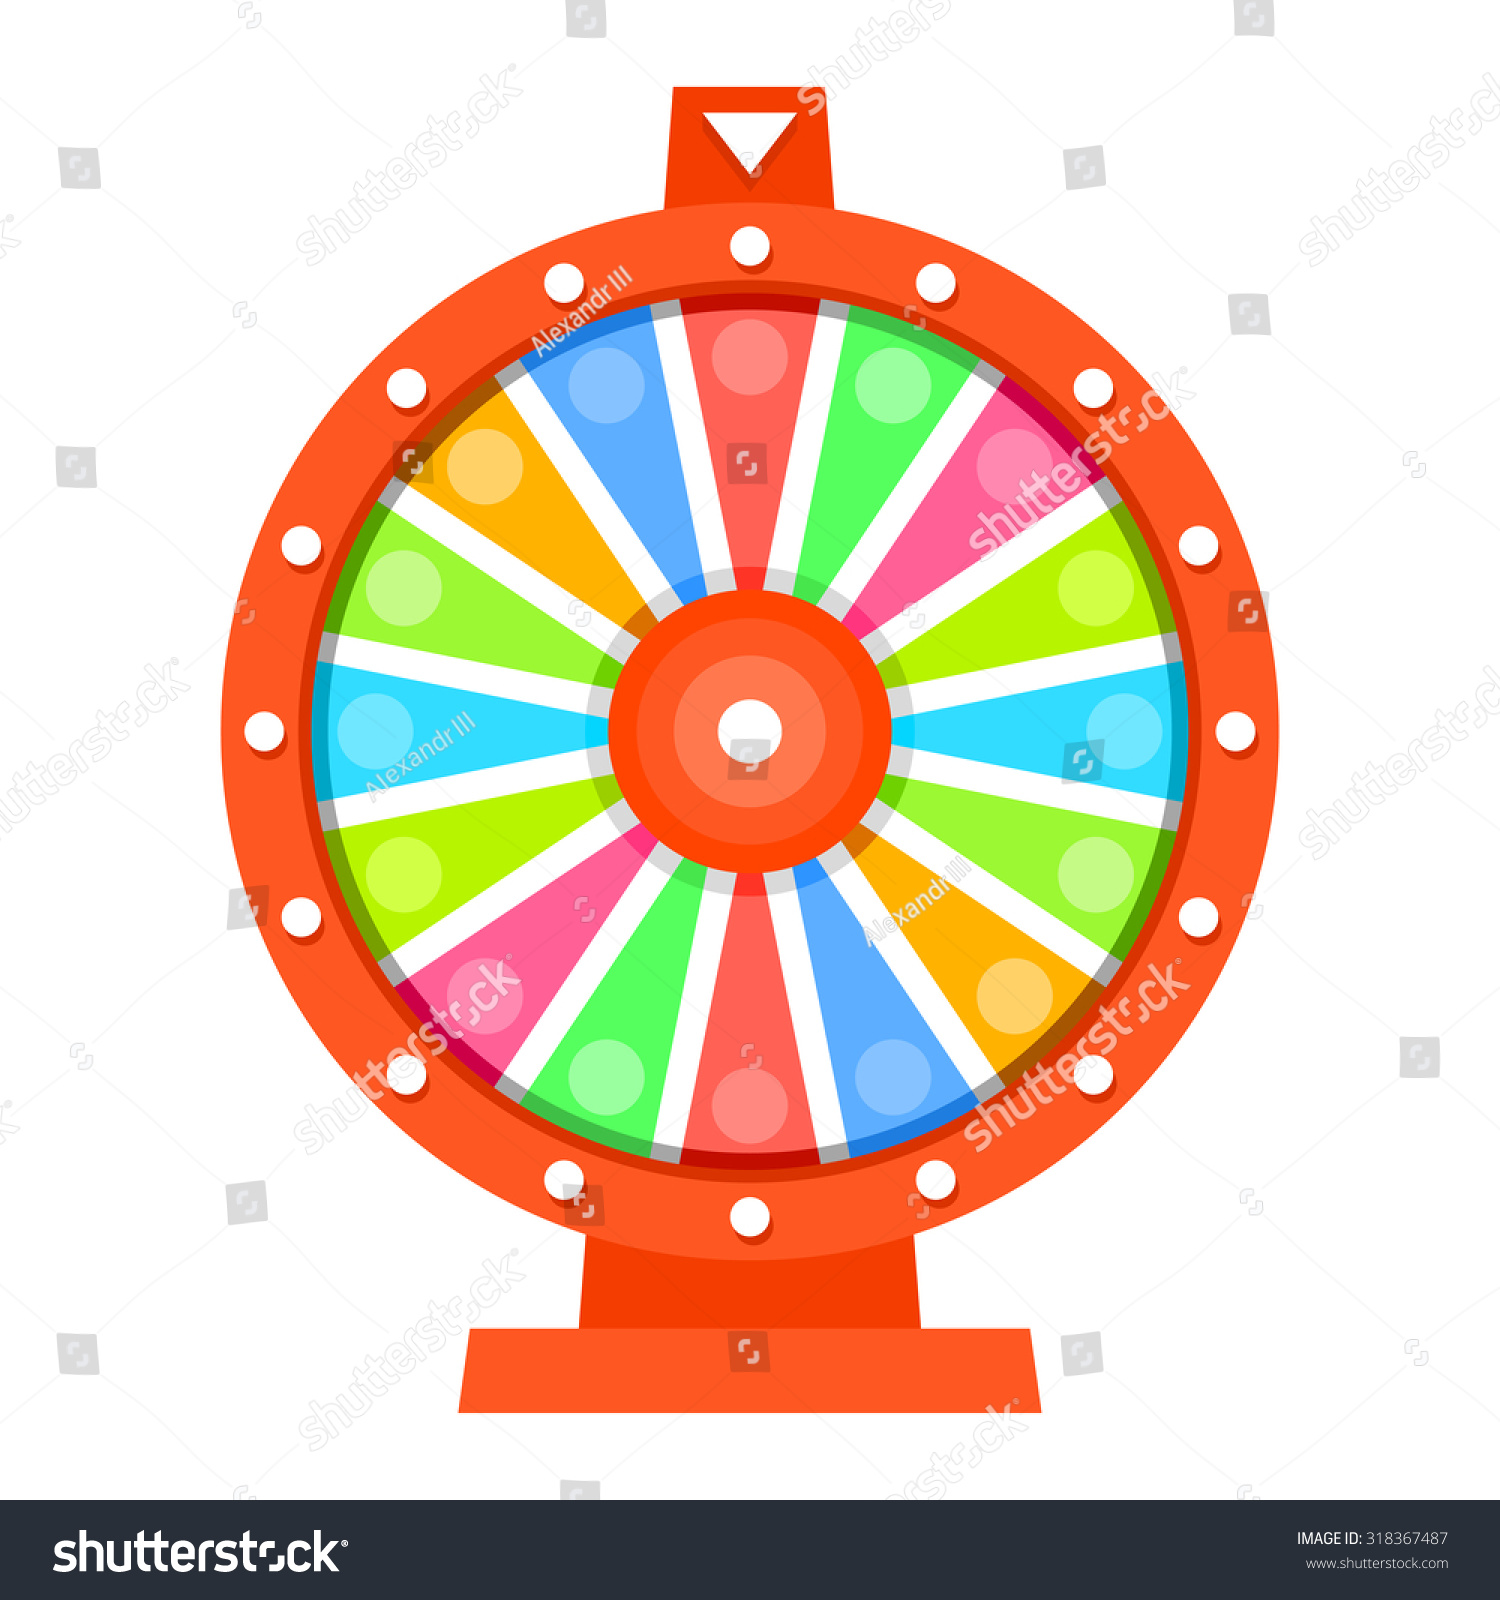 wheel-of-fortune-template-fitfasr